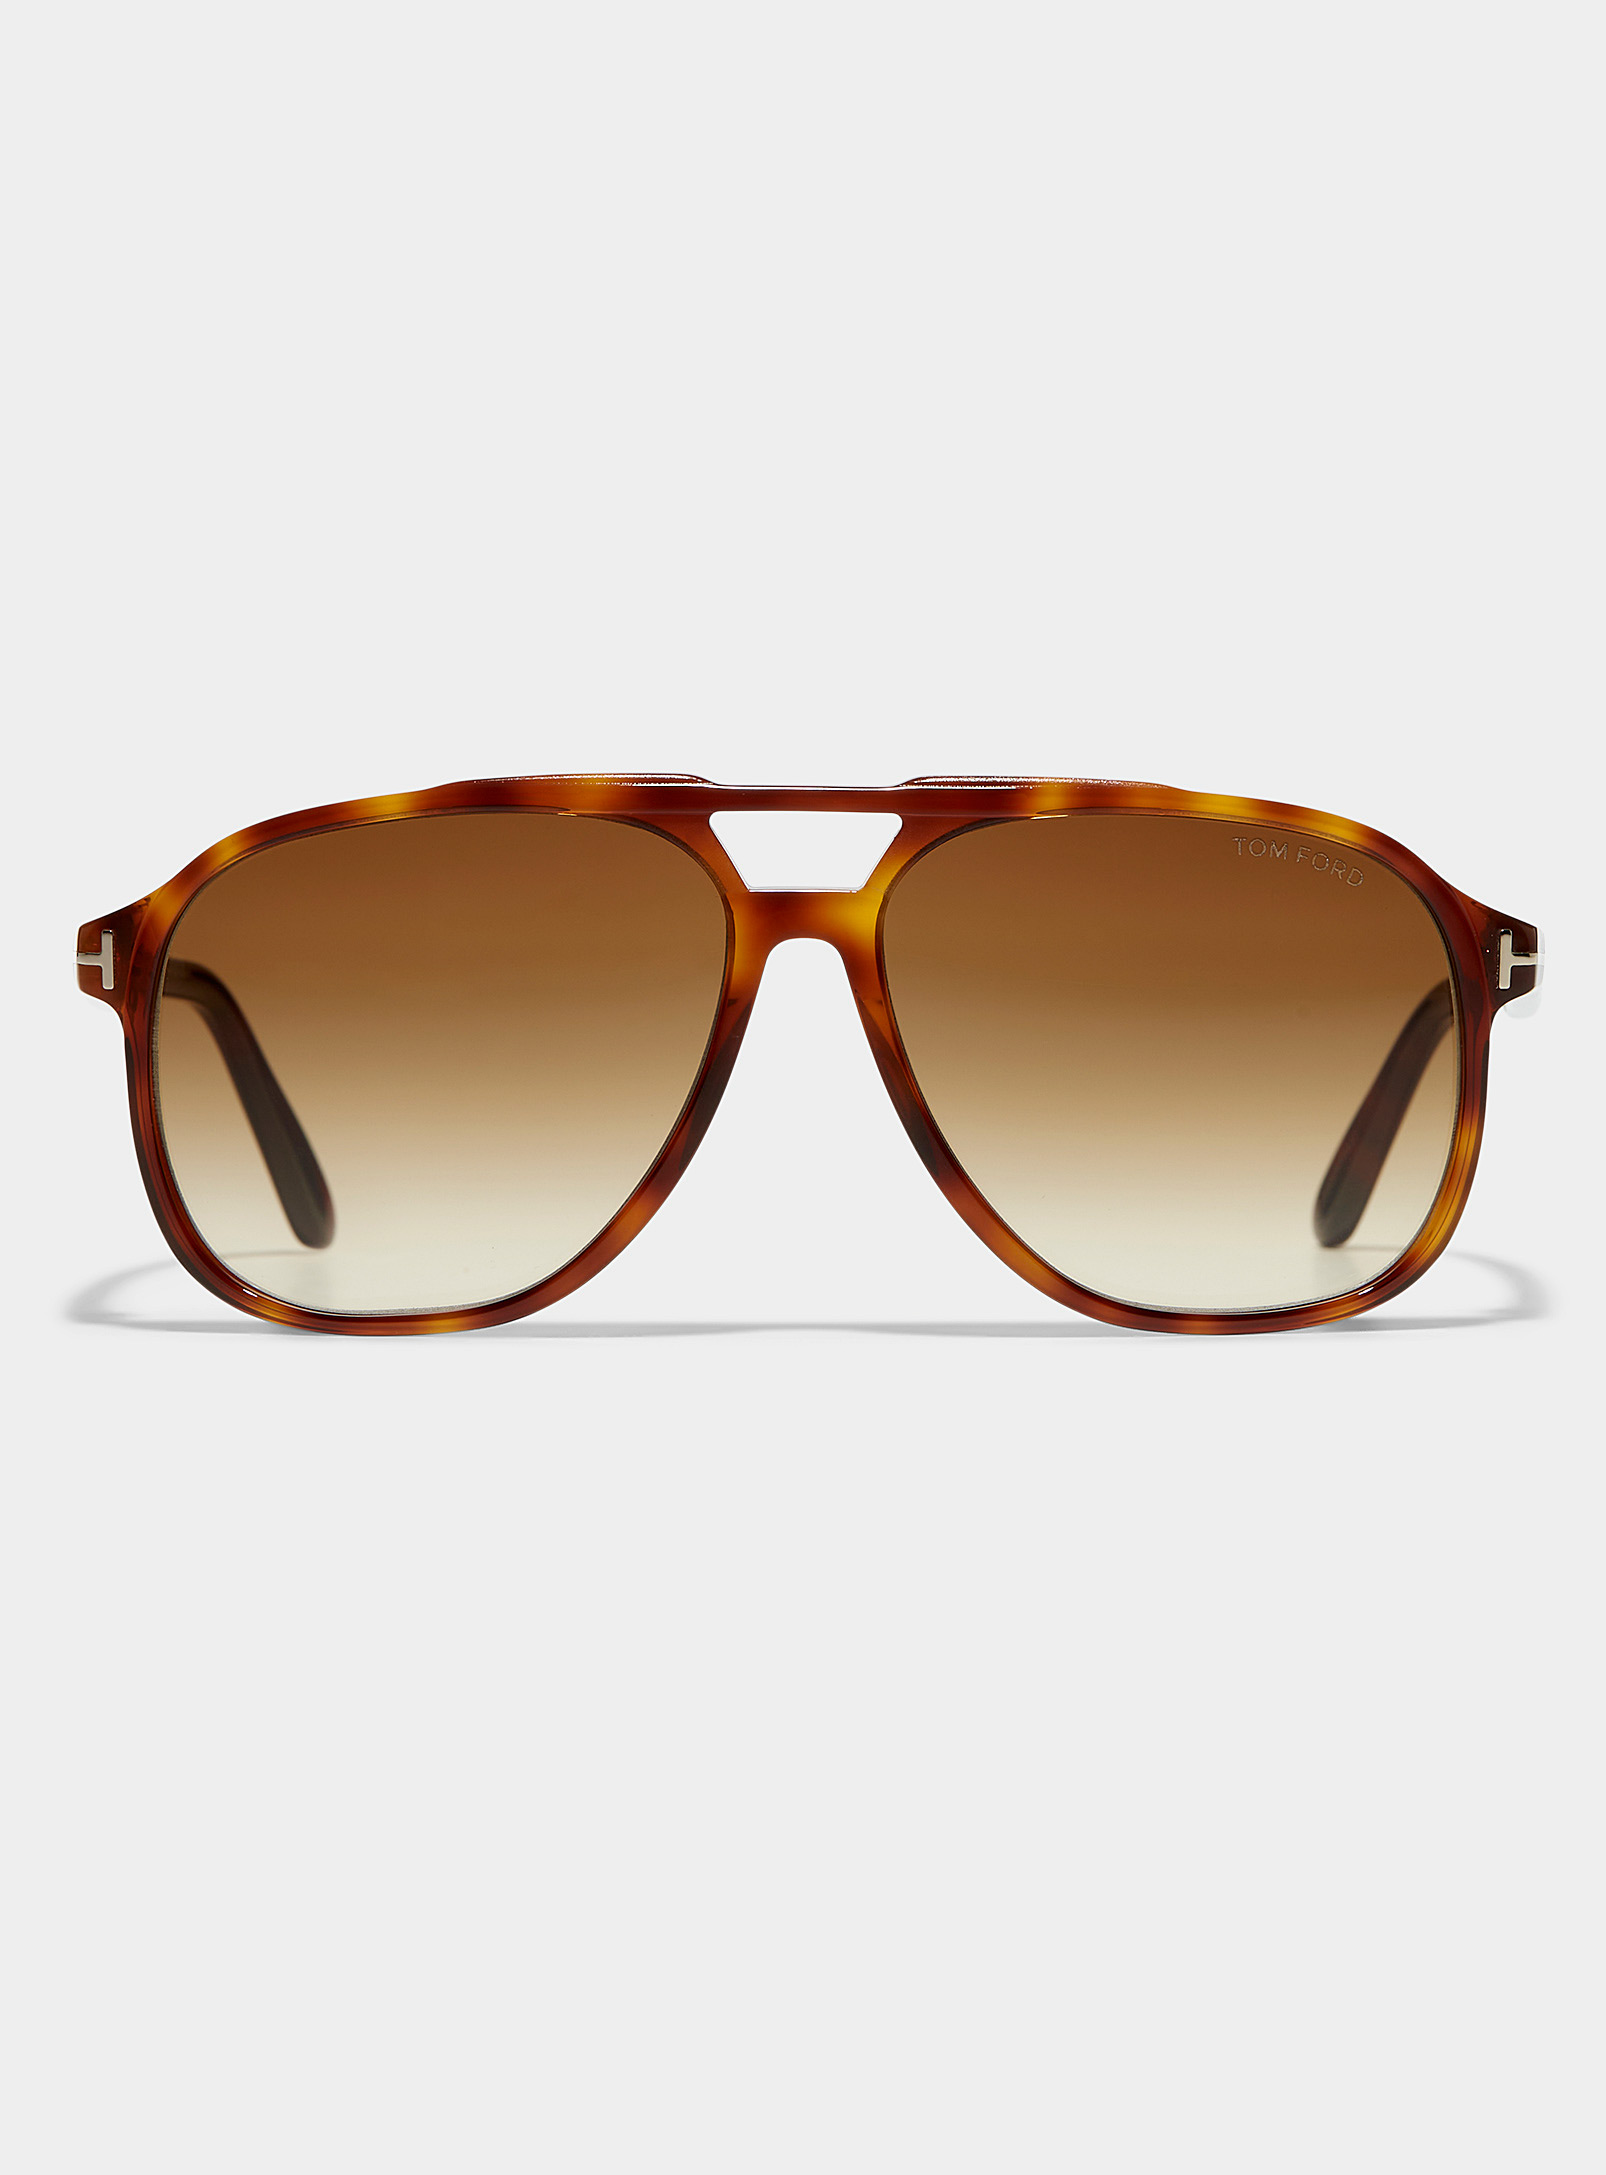 Tom Ford Raoul Aviator Sunglasses In Brown